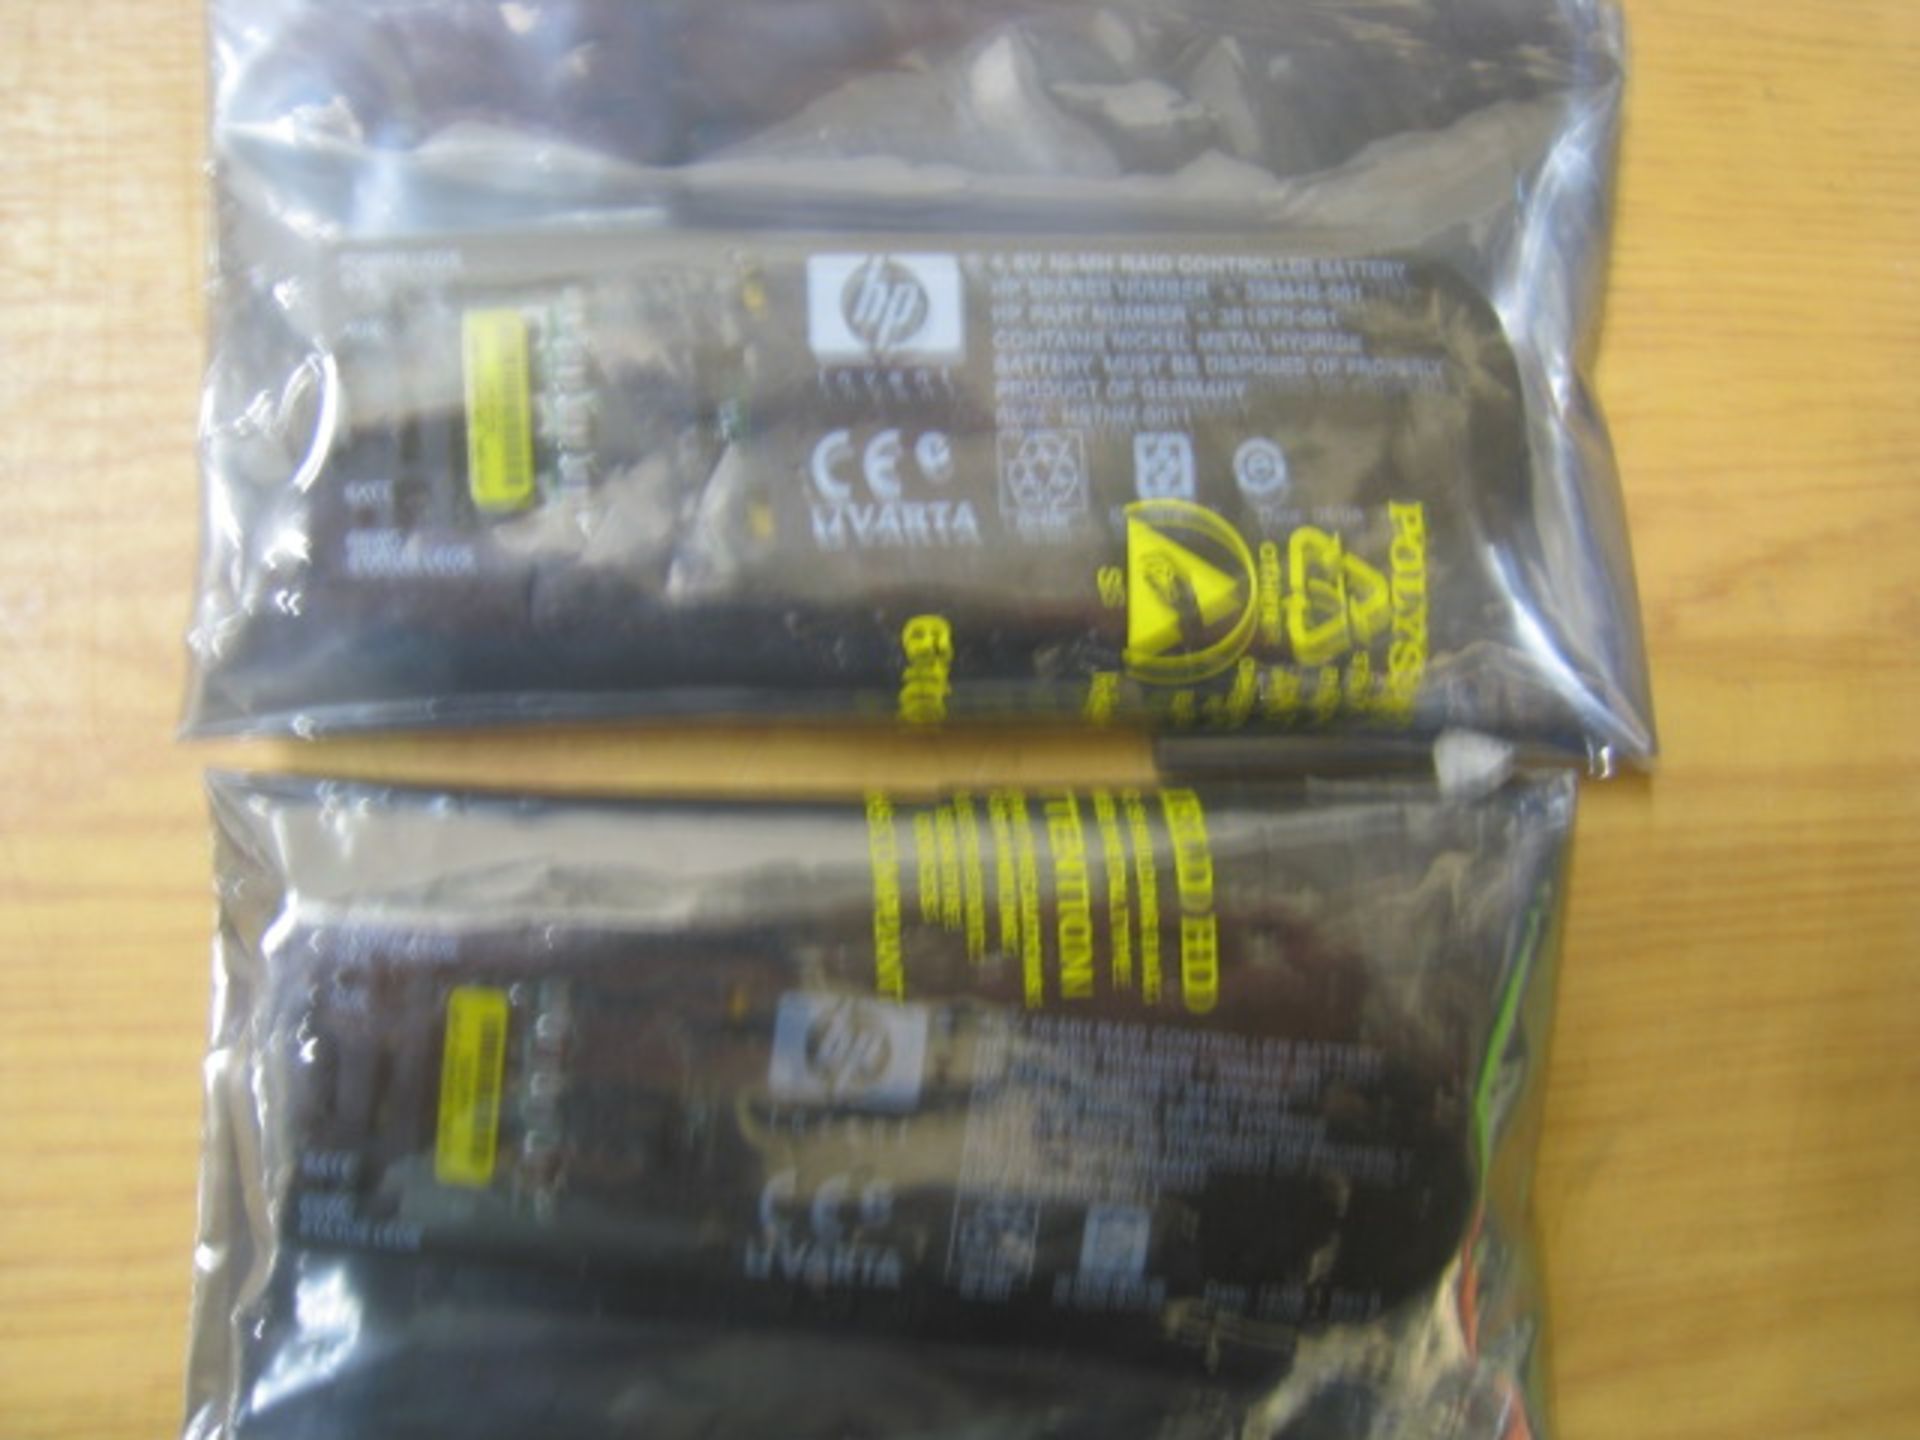 HP. 2 X 4.8V NI-MH RAID CONTROLLER BATTERY'S. HP P/N 381573-001 STILL SEALED IN ANTISTATIC BAGS - Image 2 of 2